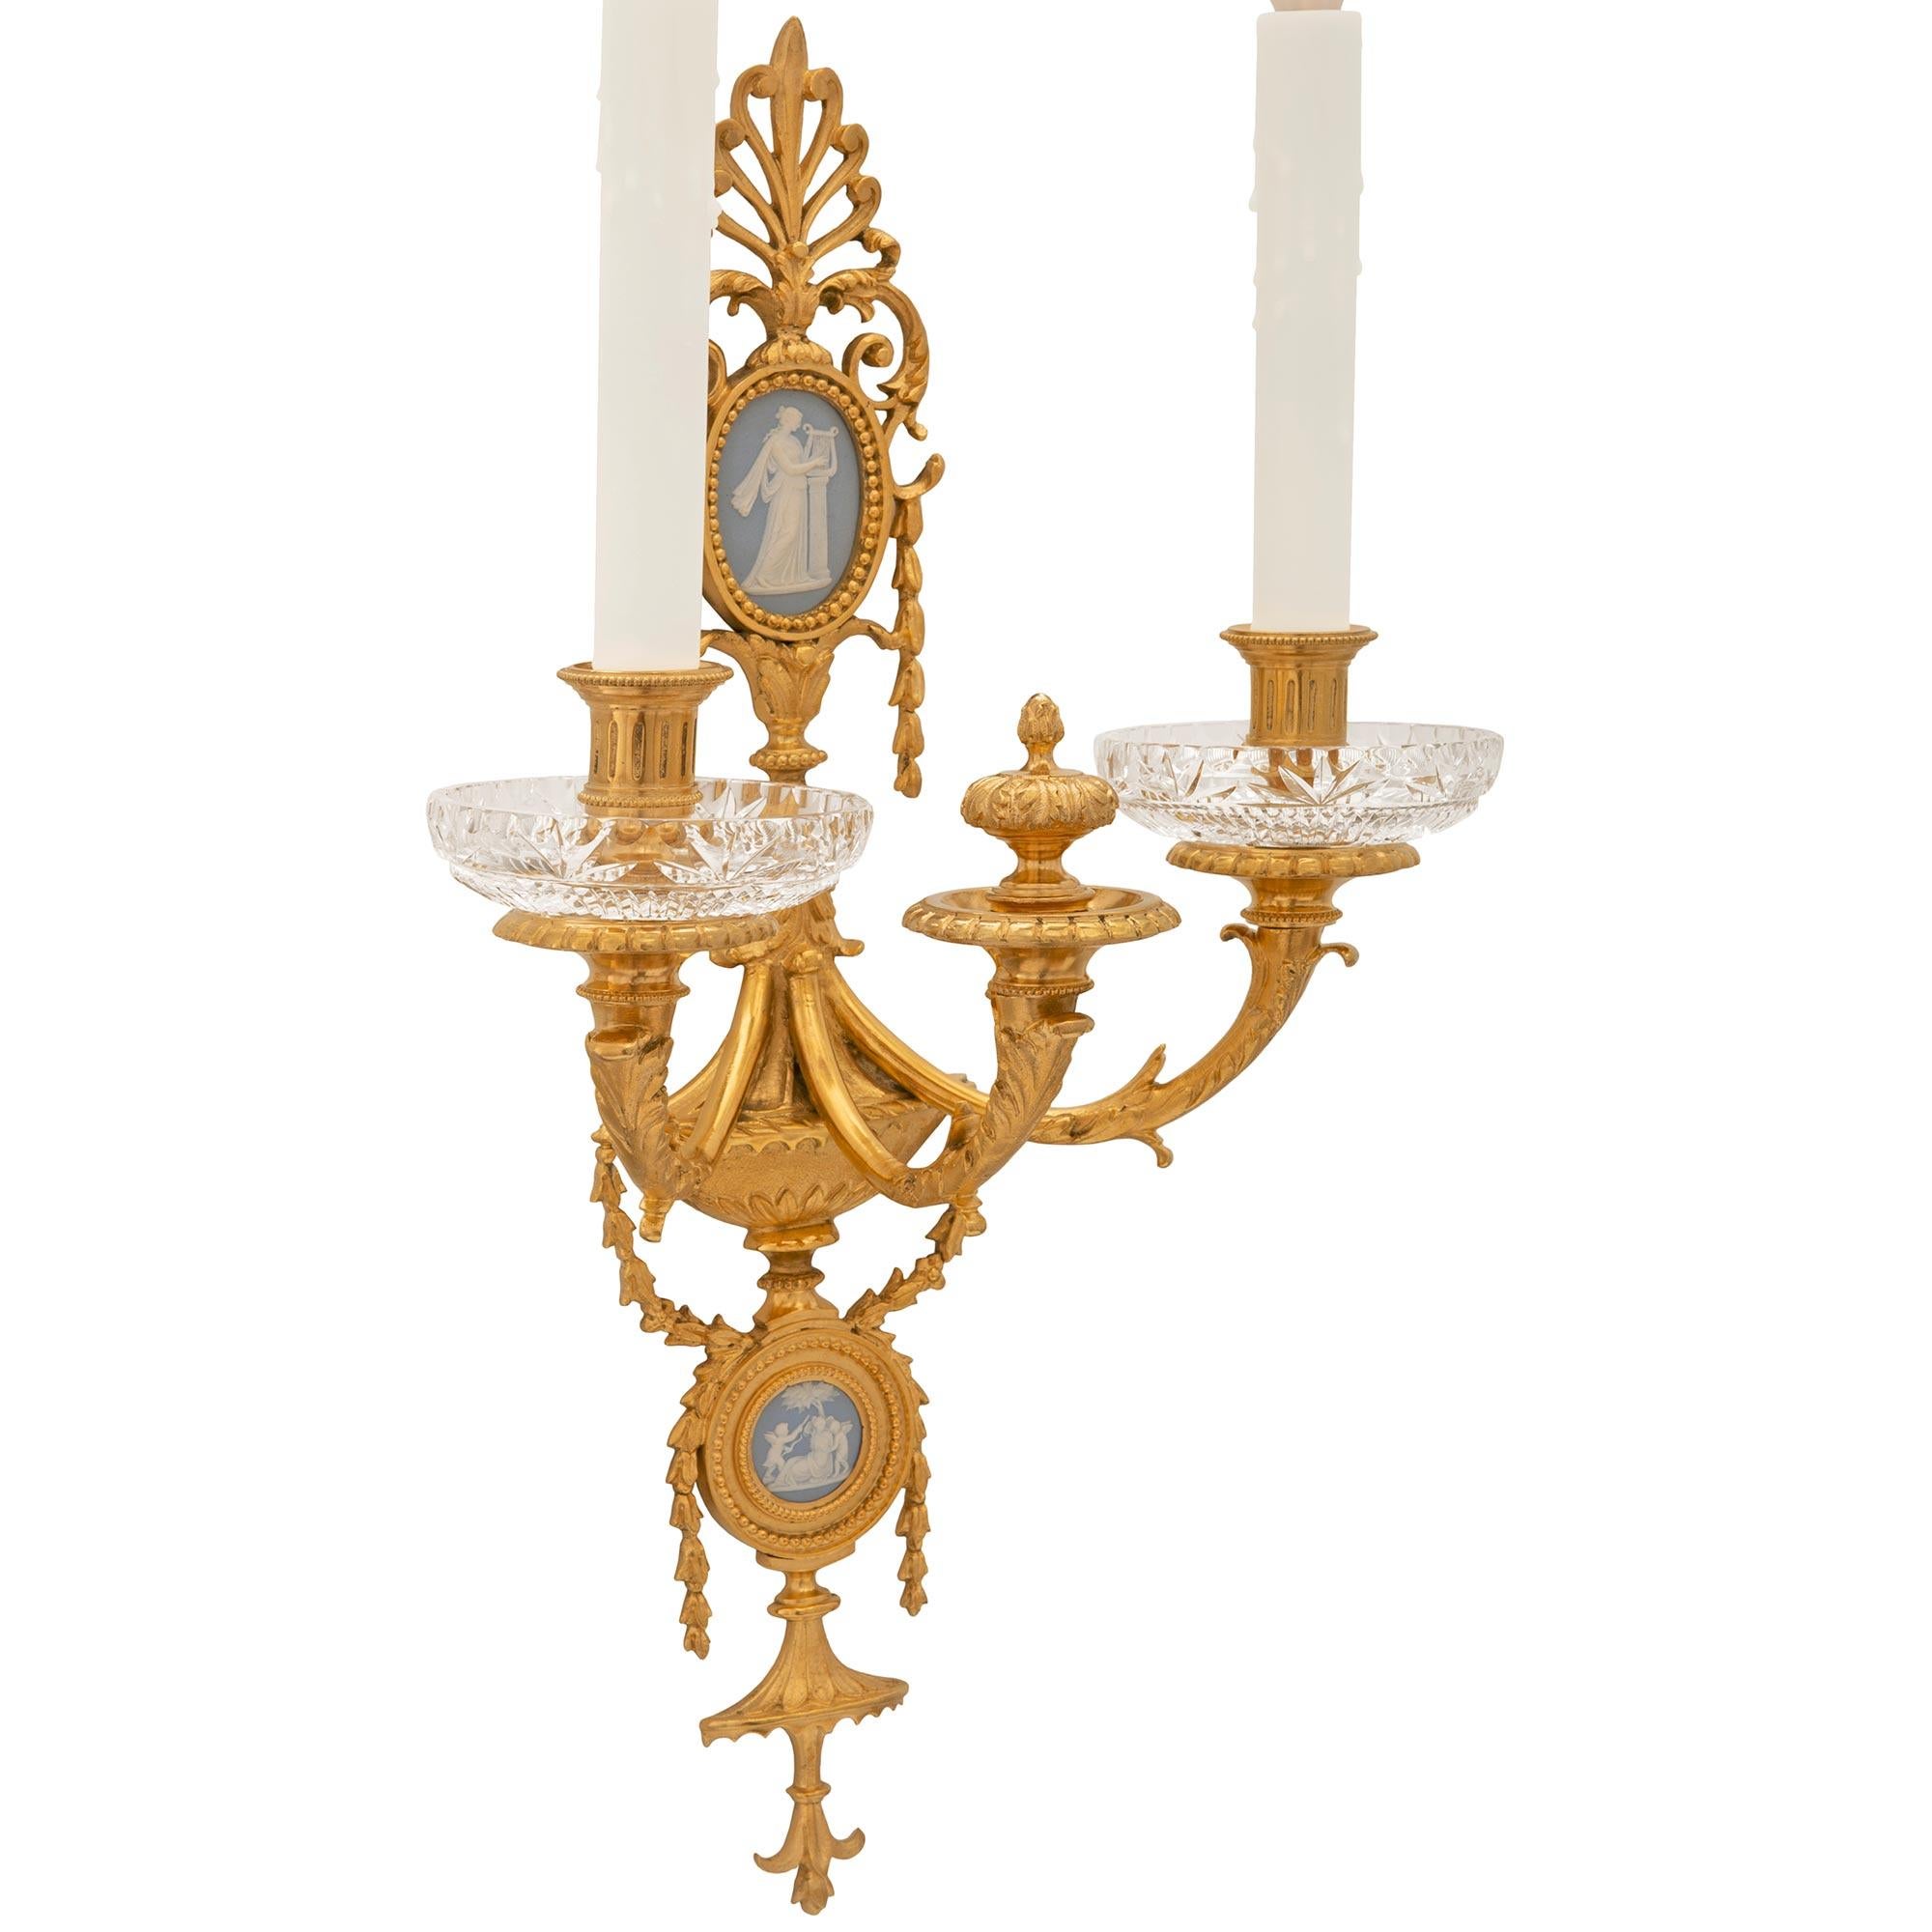 An elegant pair of French 19th century Neo-Classical st. Ormolu, Wedgwood porcelain and crystal sconces. Each three arm sconce displays a bottom reserve with draped foliate garlands centered by a Wedgwood porcelain medallion. One sconce depicts a